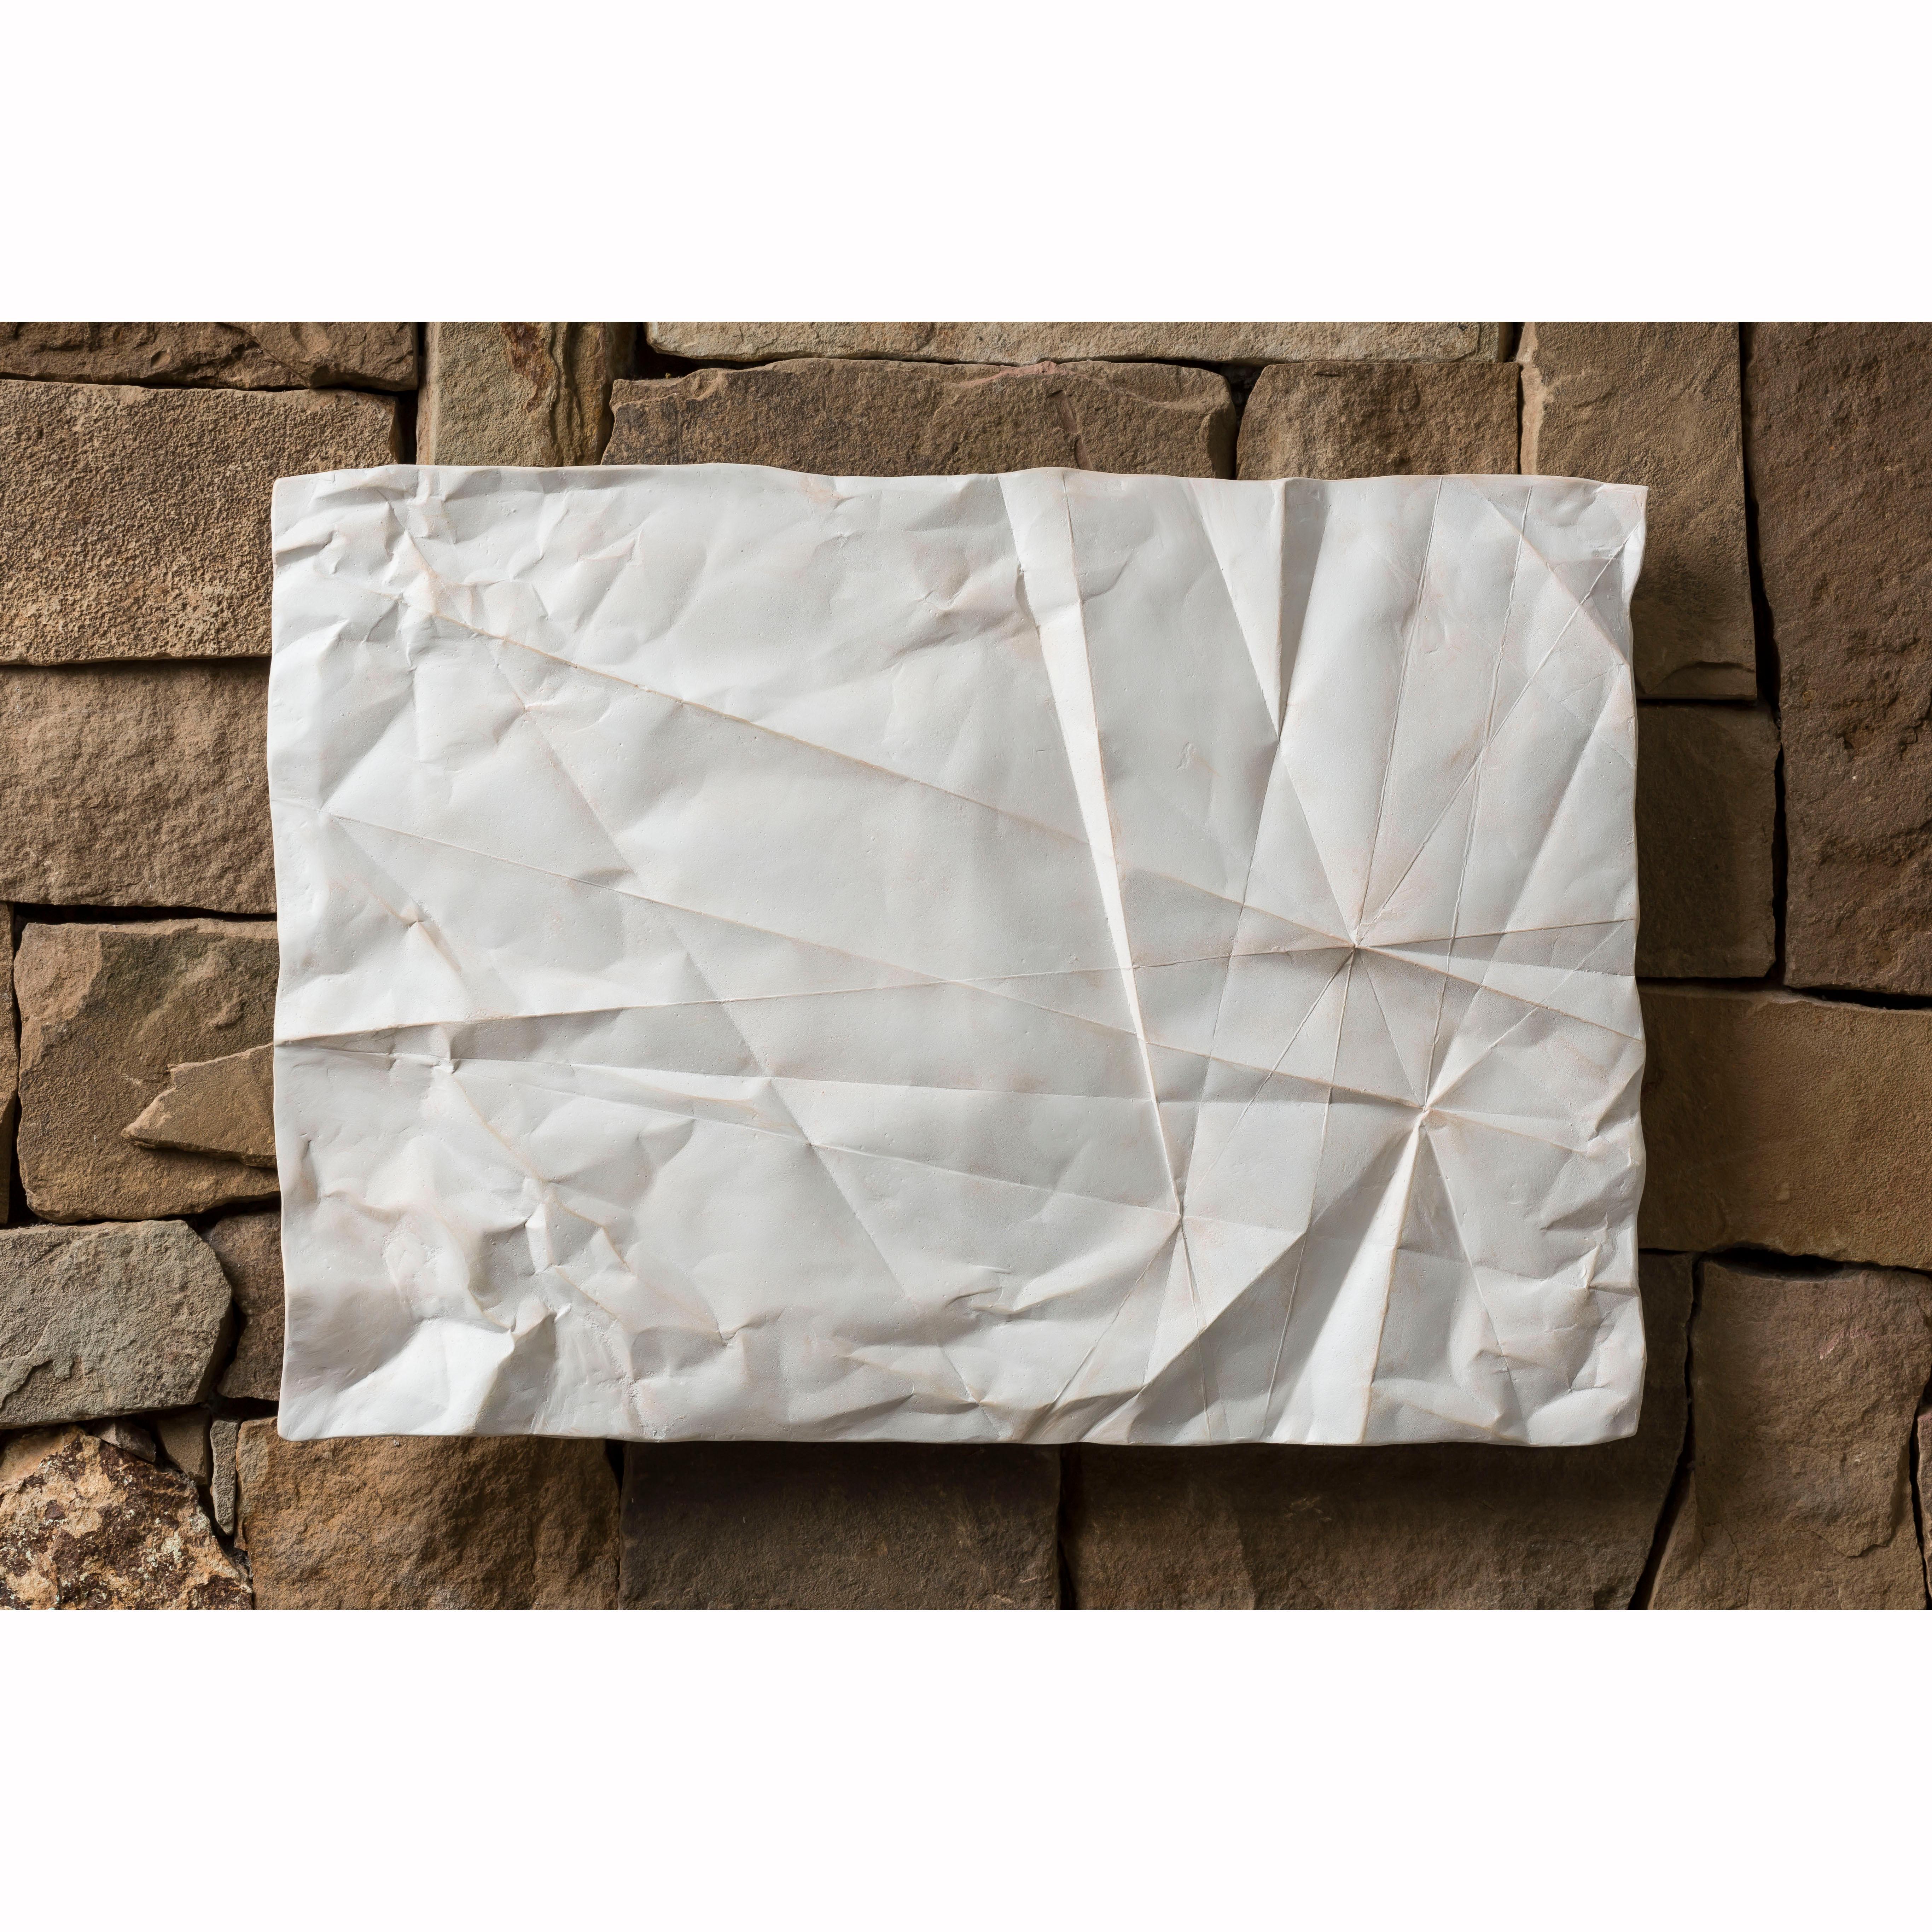 Kevin Box Abstract Sculpture - Crease Constellation I